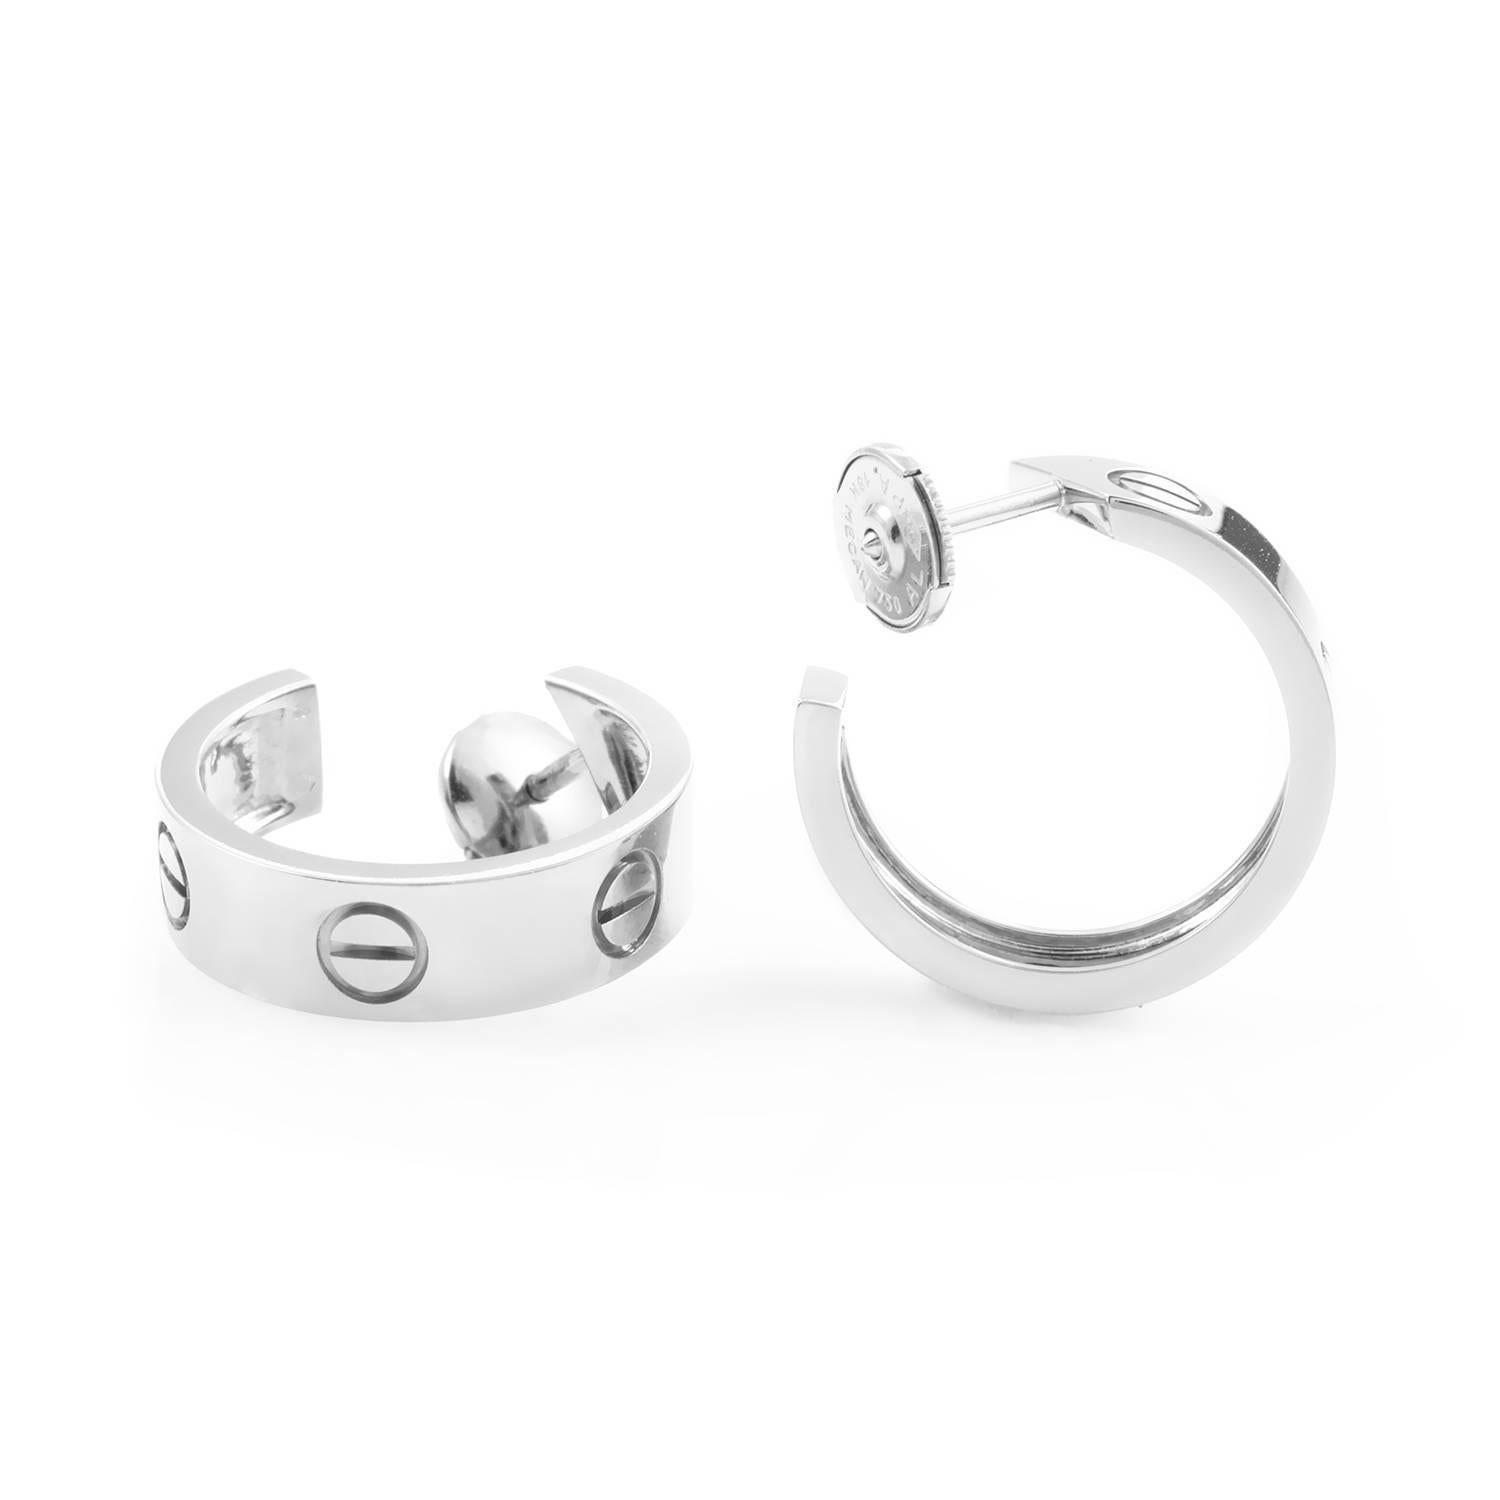 18K white gold is spun through a series of engraved impressions familiar to the Cartier Love collection. Perfectly forged, dignified yet unquestionably regal, these Cartier earrings are a perfect addition to any ensemble.
Included Items: